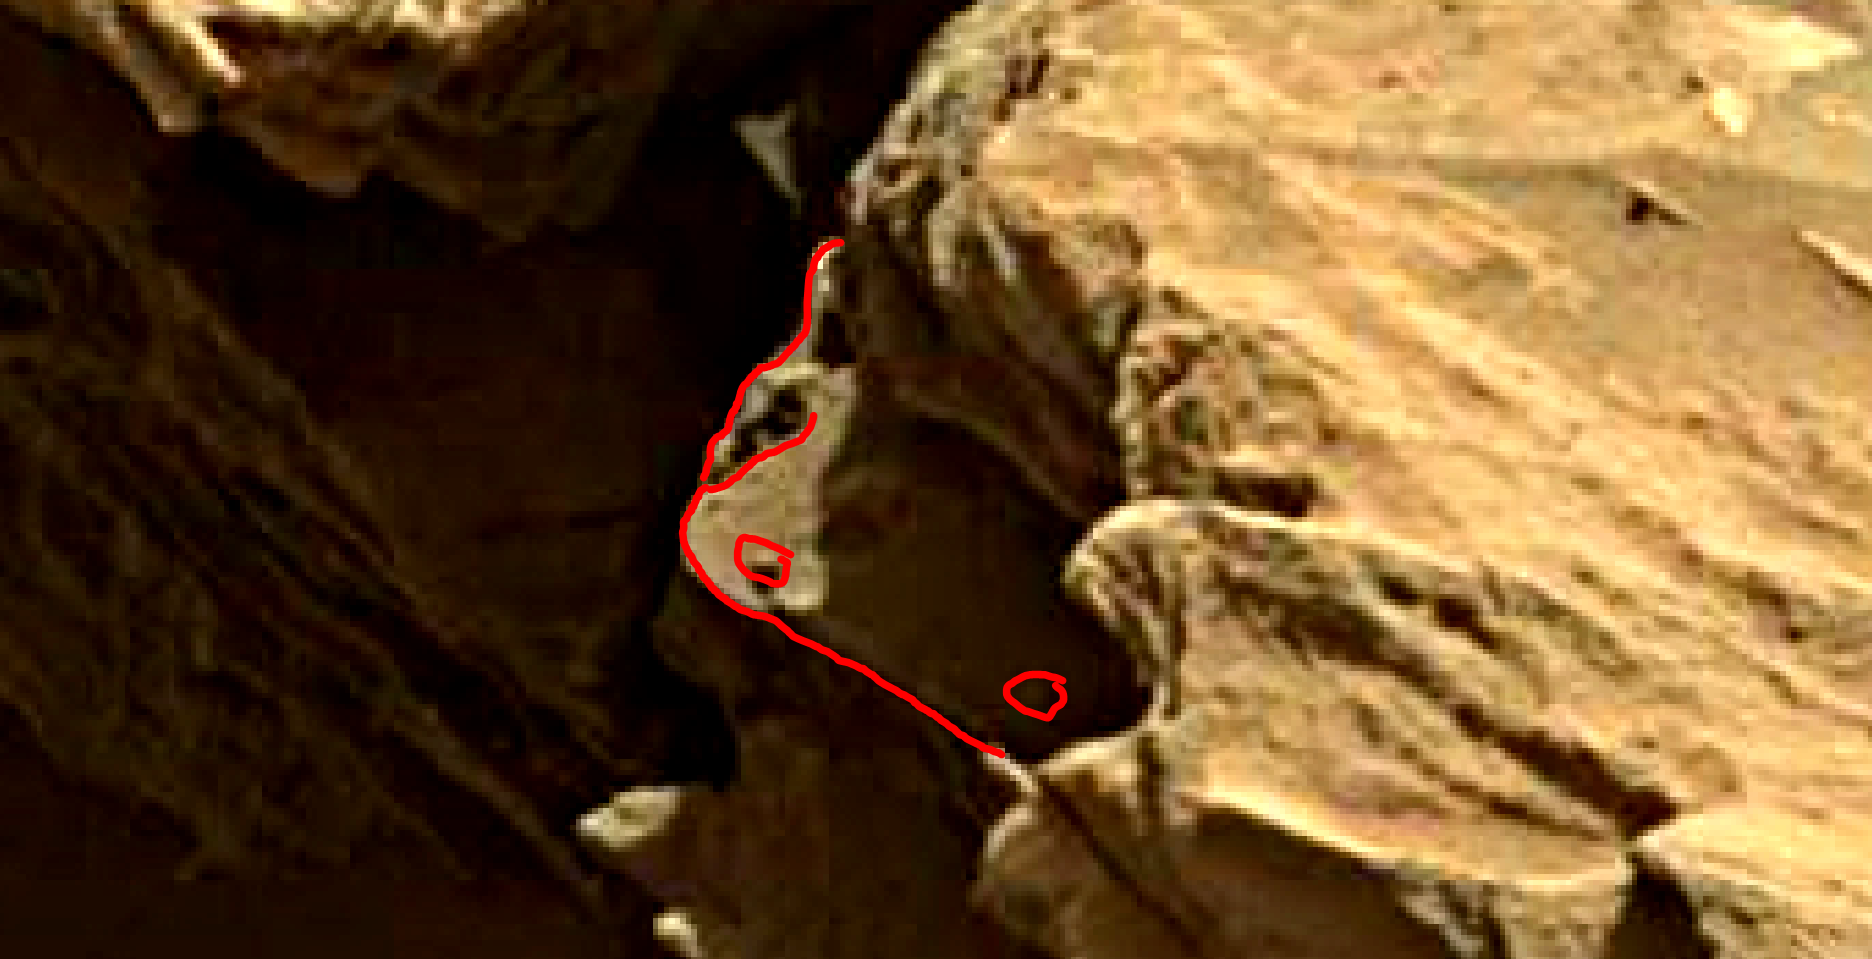 mars sol 1349 anomaly-artifacts 2a was life on mars